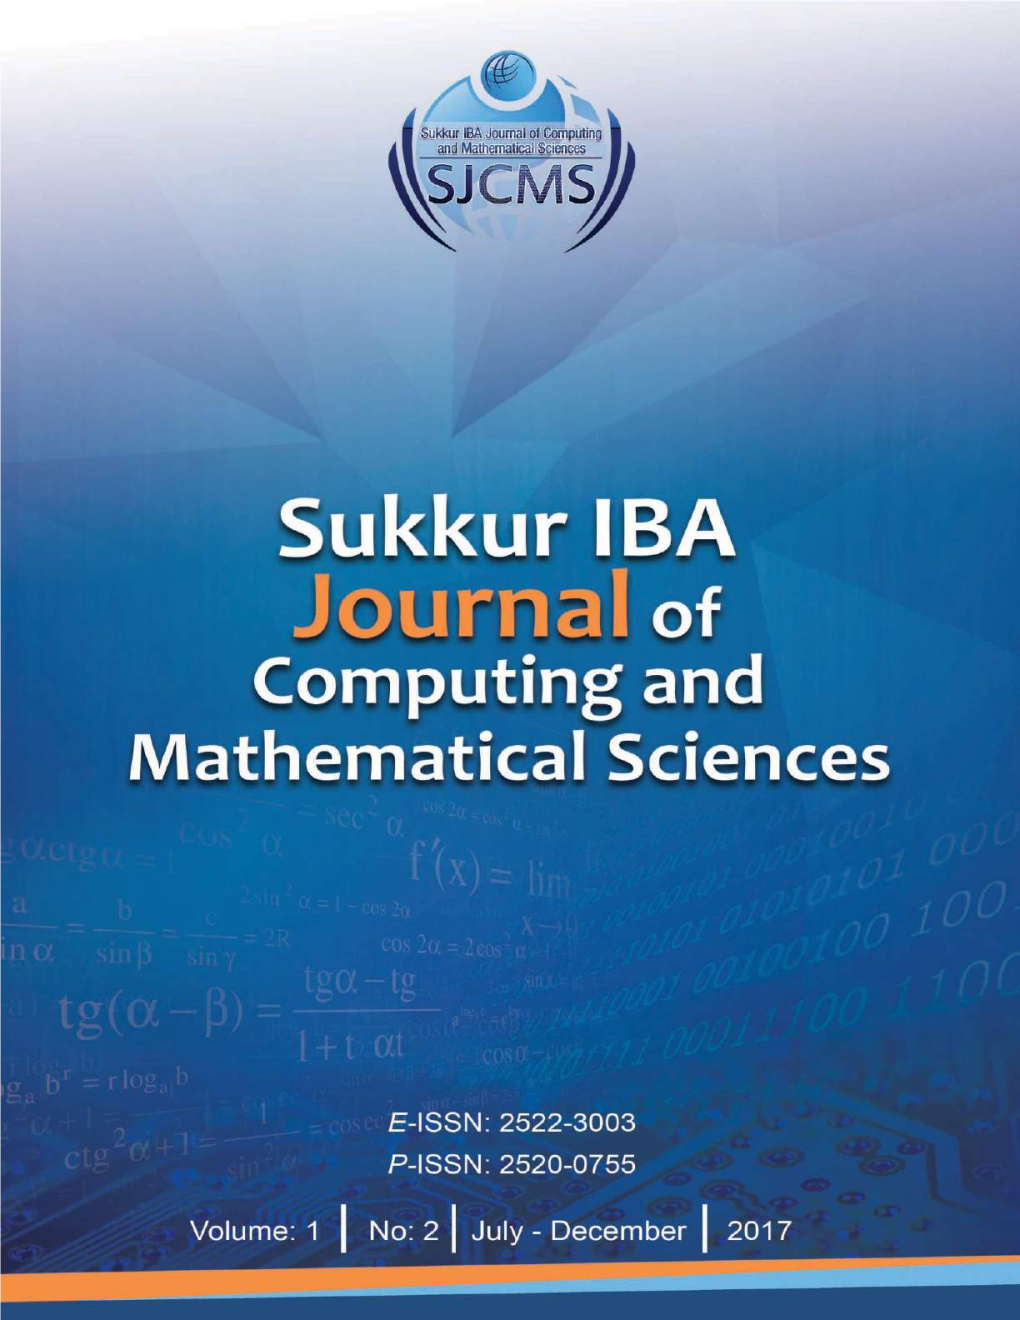 Sukkur IBA Journal of Computing and Mathematical Sciences (SJCMS) Is the Bi-Annual Research Journal Published by Sukkur IBA University, Pakistan